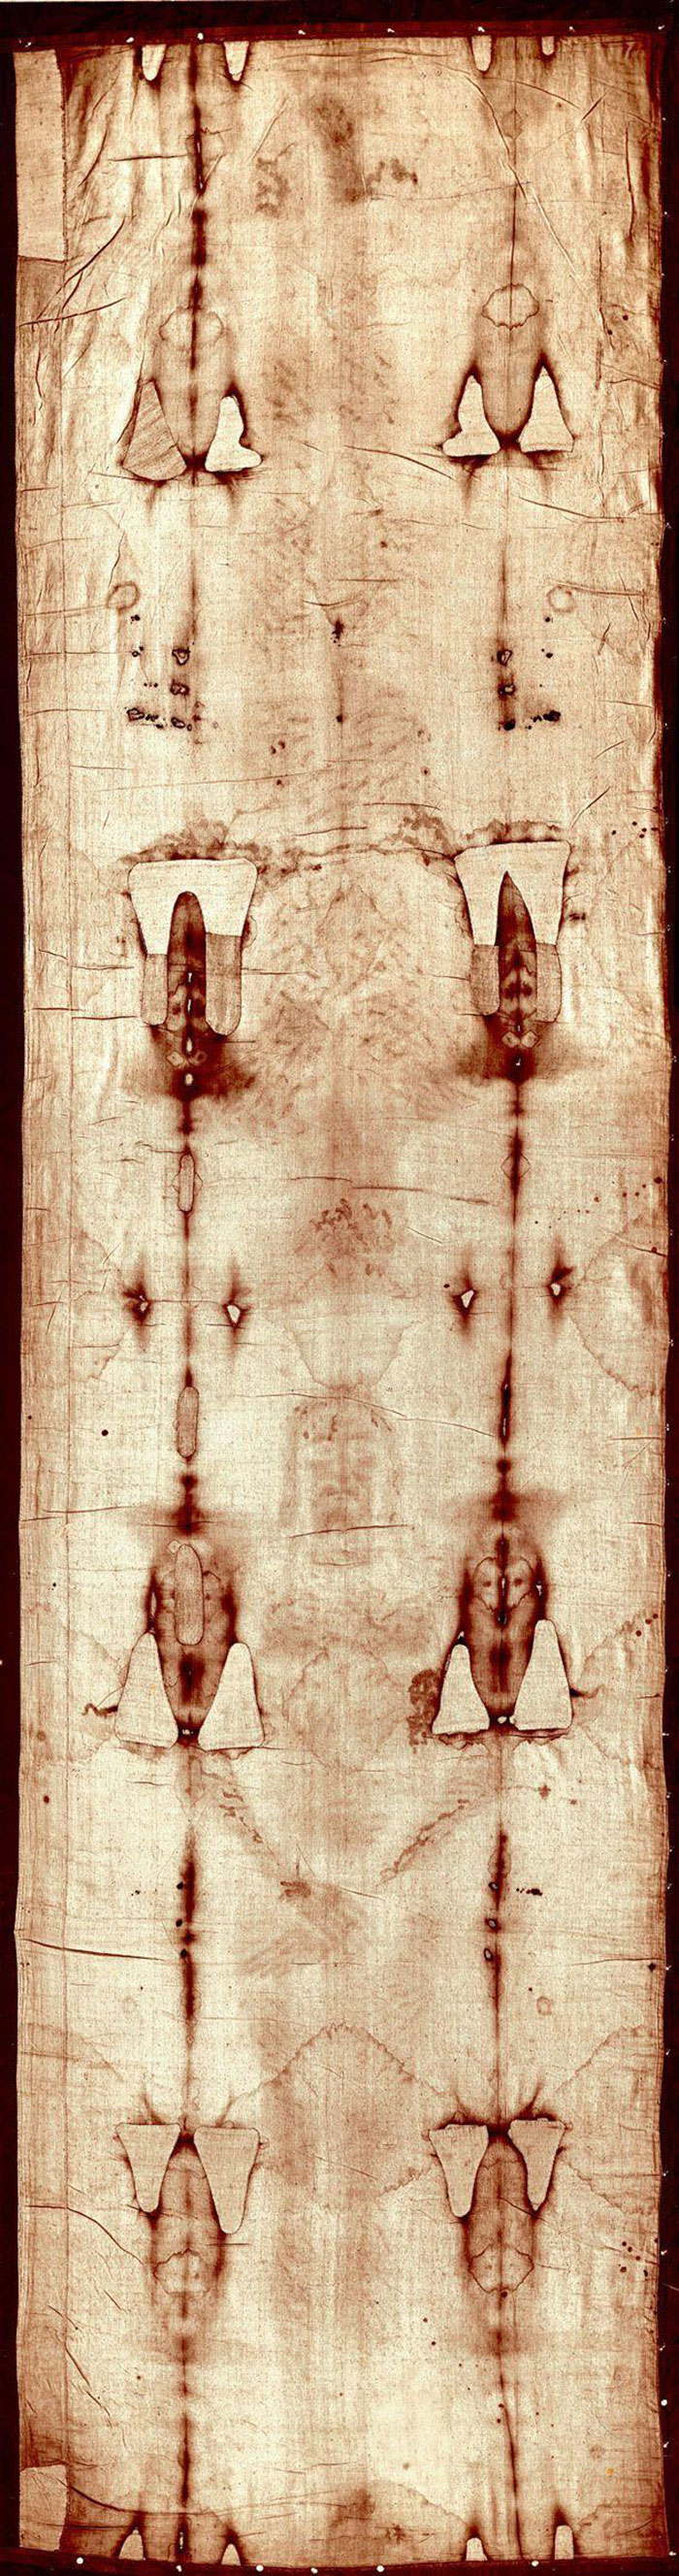 For millions of Christians, the Shroud of Turin is one of the most revered religious icons in the world. The shroud is a 14-foot piece of linen fabric that was purportedly used to wrap Jesus's body for burial. Most remarkably, the shroud features a negative image of an adult male, supposedly Jesus himself. The image, some have suggested, is actually an incredibly detailed bloodstain left by Jesus's body. Since 1578, the shroud has resided in the cathedral of San Giovanni Battista in Turin, Italy, where it attracts thousands of visitors each year.

To some, the validity of a religious icon is a matter of faith, not science. But thanks to modern carbon-dating techniques, scientists have been able to prove that the Shroud of Turin couldn't have been Jesus's actual burial shroud. The Bible doesn't specify exactly what year Jesus perished, but most scholars agree it was the year 33 AD. In 1988, carbon-dating showed that the Shroud of Turin originated in the Middle Ages. Forensic scientists also examined the blood spatter patterns on the shroud and concluded they were made by someone sitting in a variety of positions, not lying flat like a cadaver.

Traditionally, churches and cathedrals like San Giovanni Battista have displayed holy relics purportedly belonging to Jesus, the saints, and other important religious figures. These holy relics weren't just objects of worship, but also big moneymakers that attracted thousands of pilgrims, just like they do today. Like the Shroud of Turin, the provenances of these relics are impossible to prove. In more recent years, the Vatican has officially classified the Shroud of Turin as "an icon" rather than a literal holy relic.